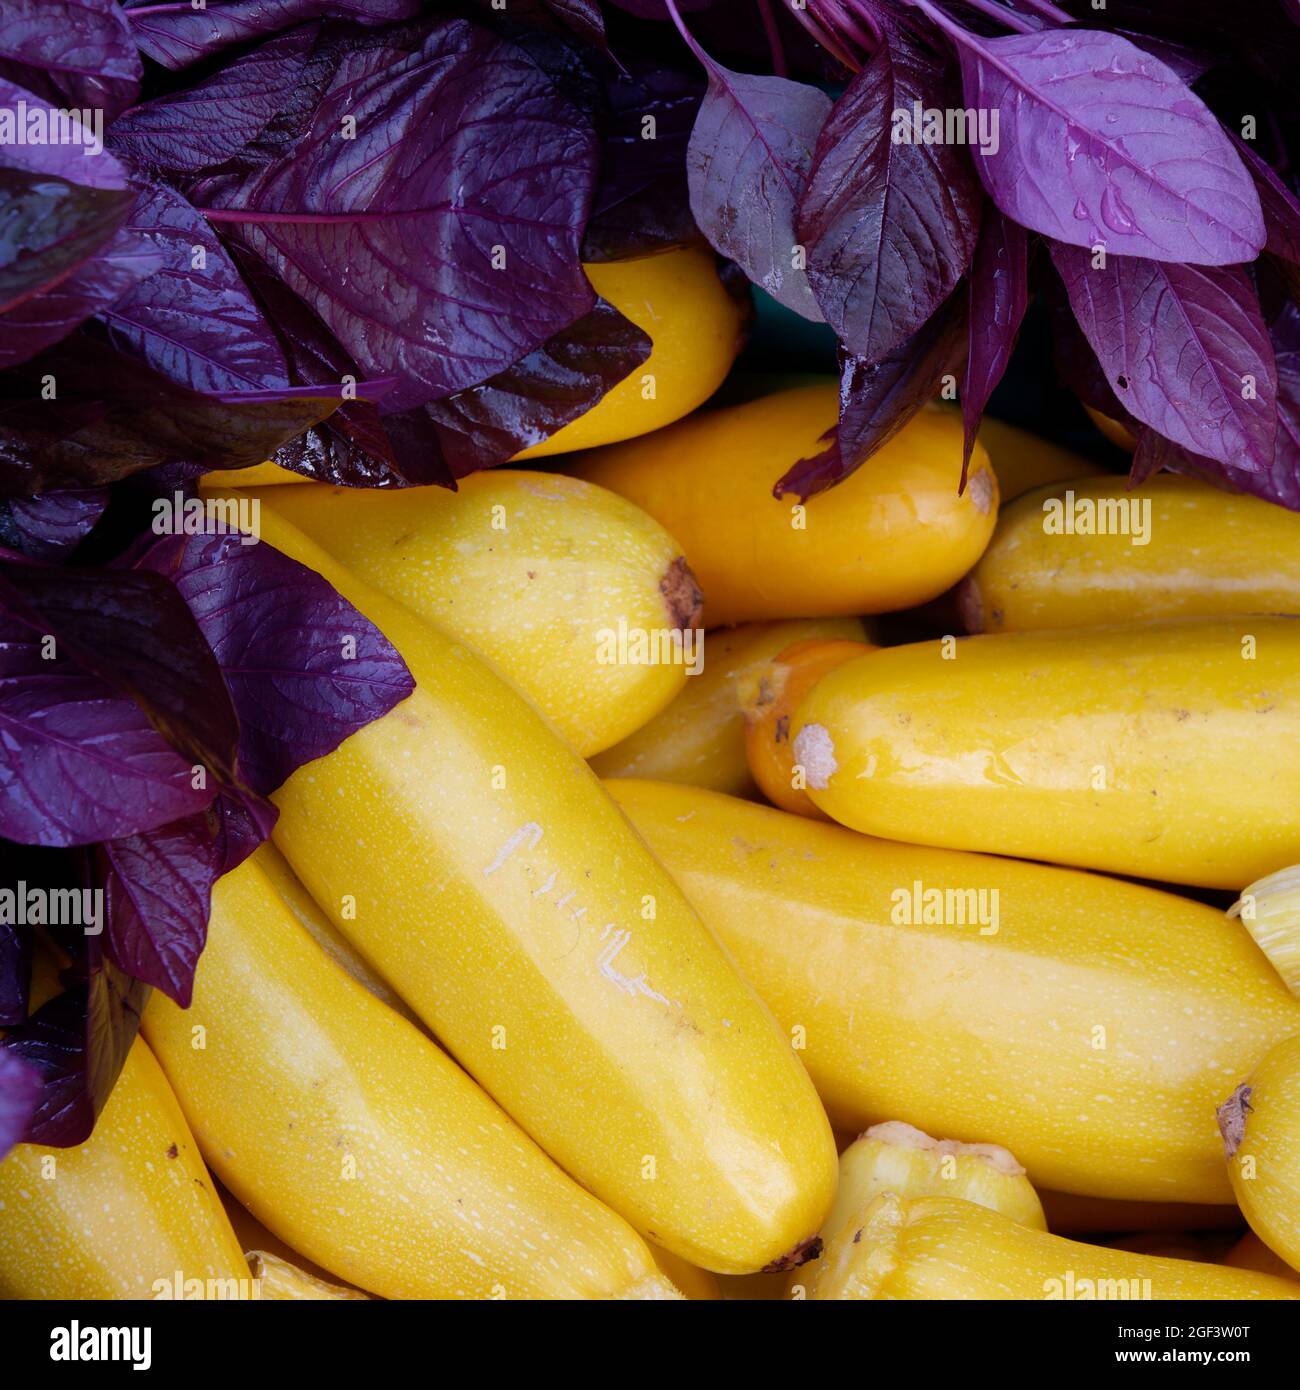 Freshly harvested organic vegetables : Red amaranth and yellow courgettes Stock Photo